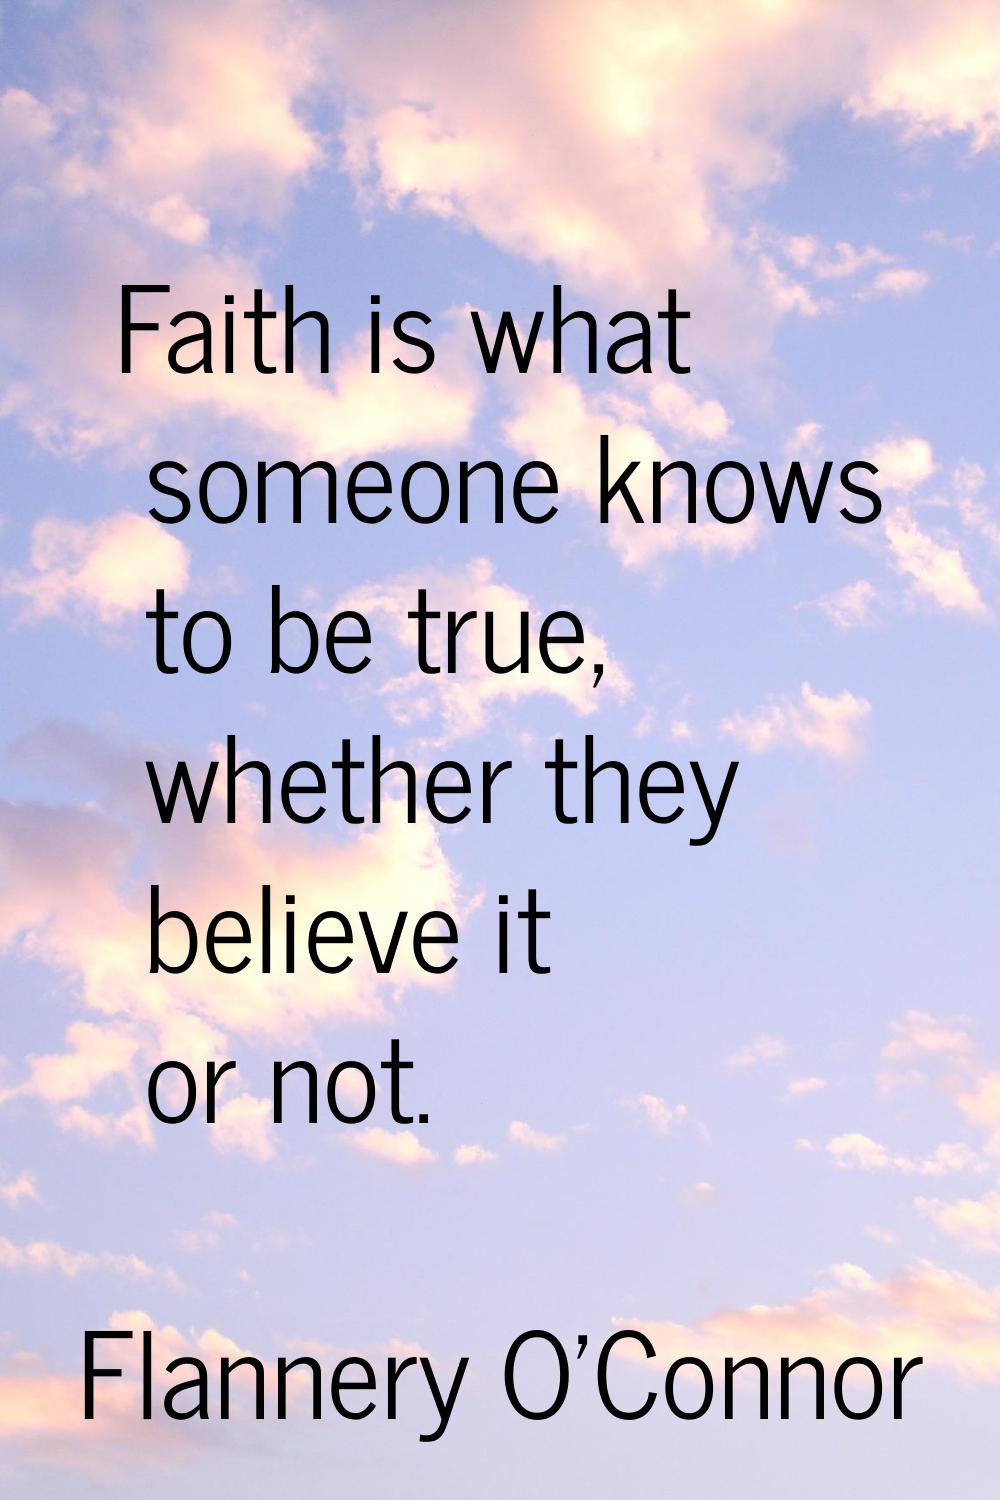 Faith is what someone knows to be true, whether they believe it or not.